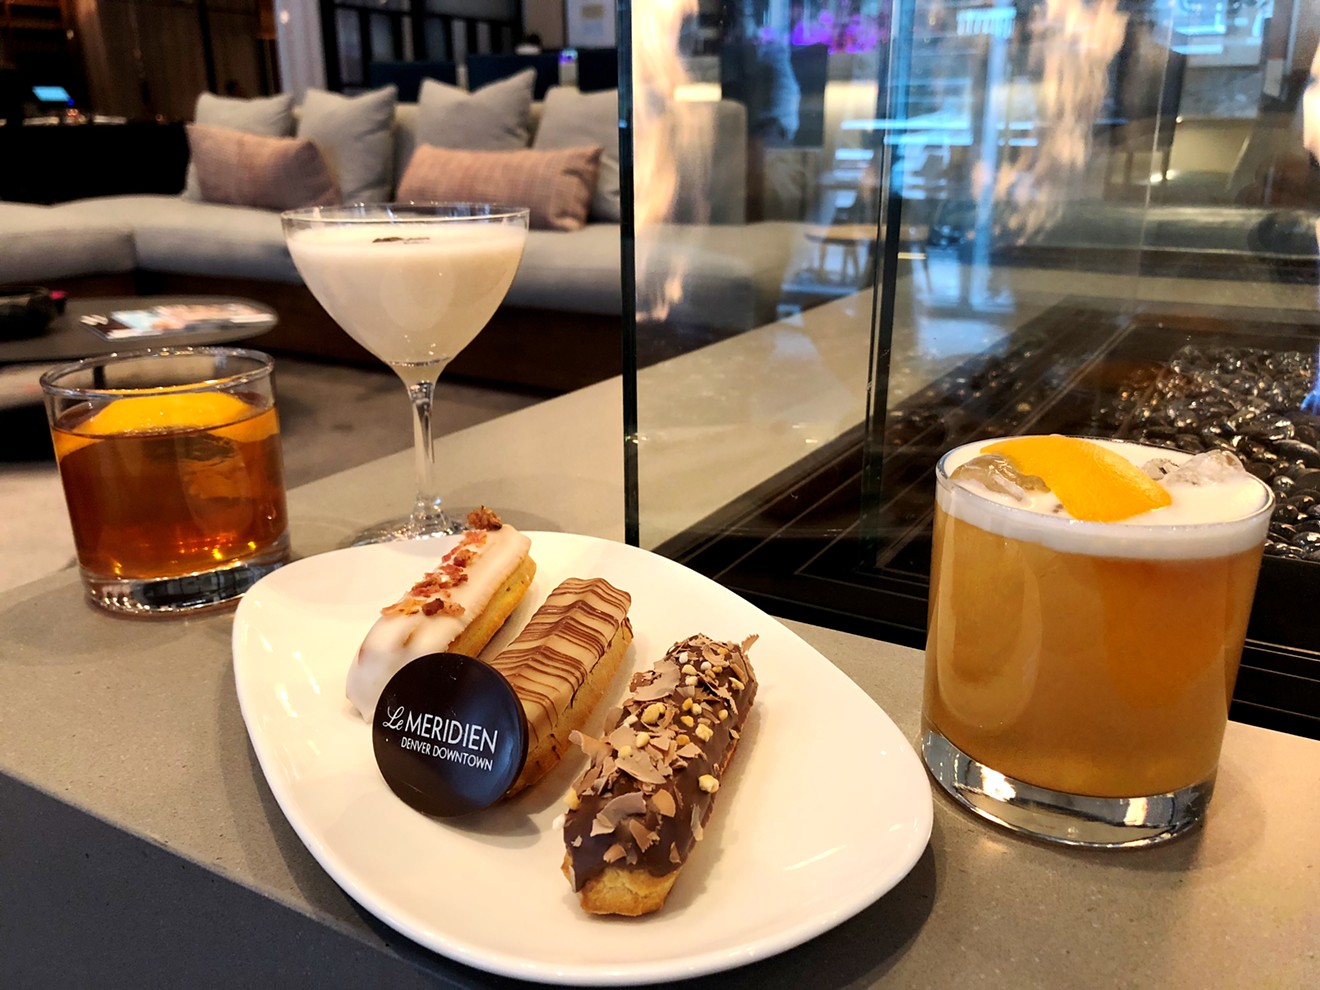 A trio of éclairs with cocktail pairings at Le Méridien.